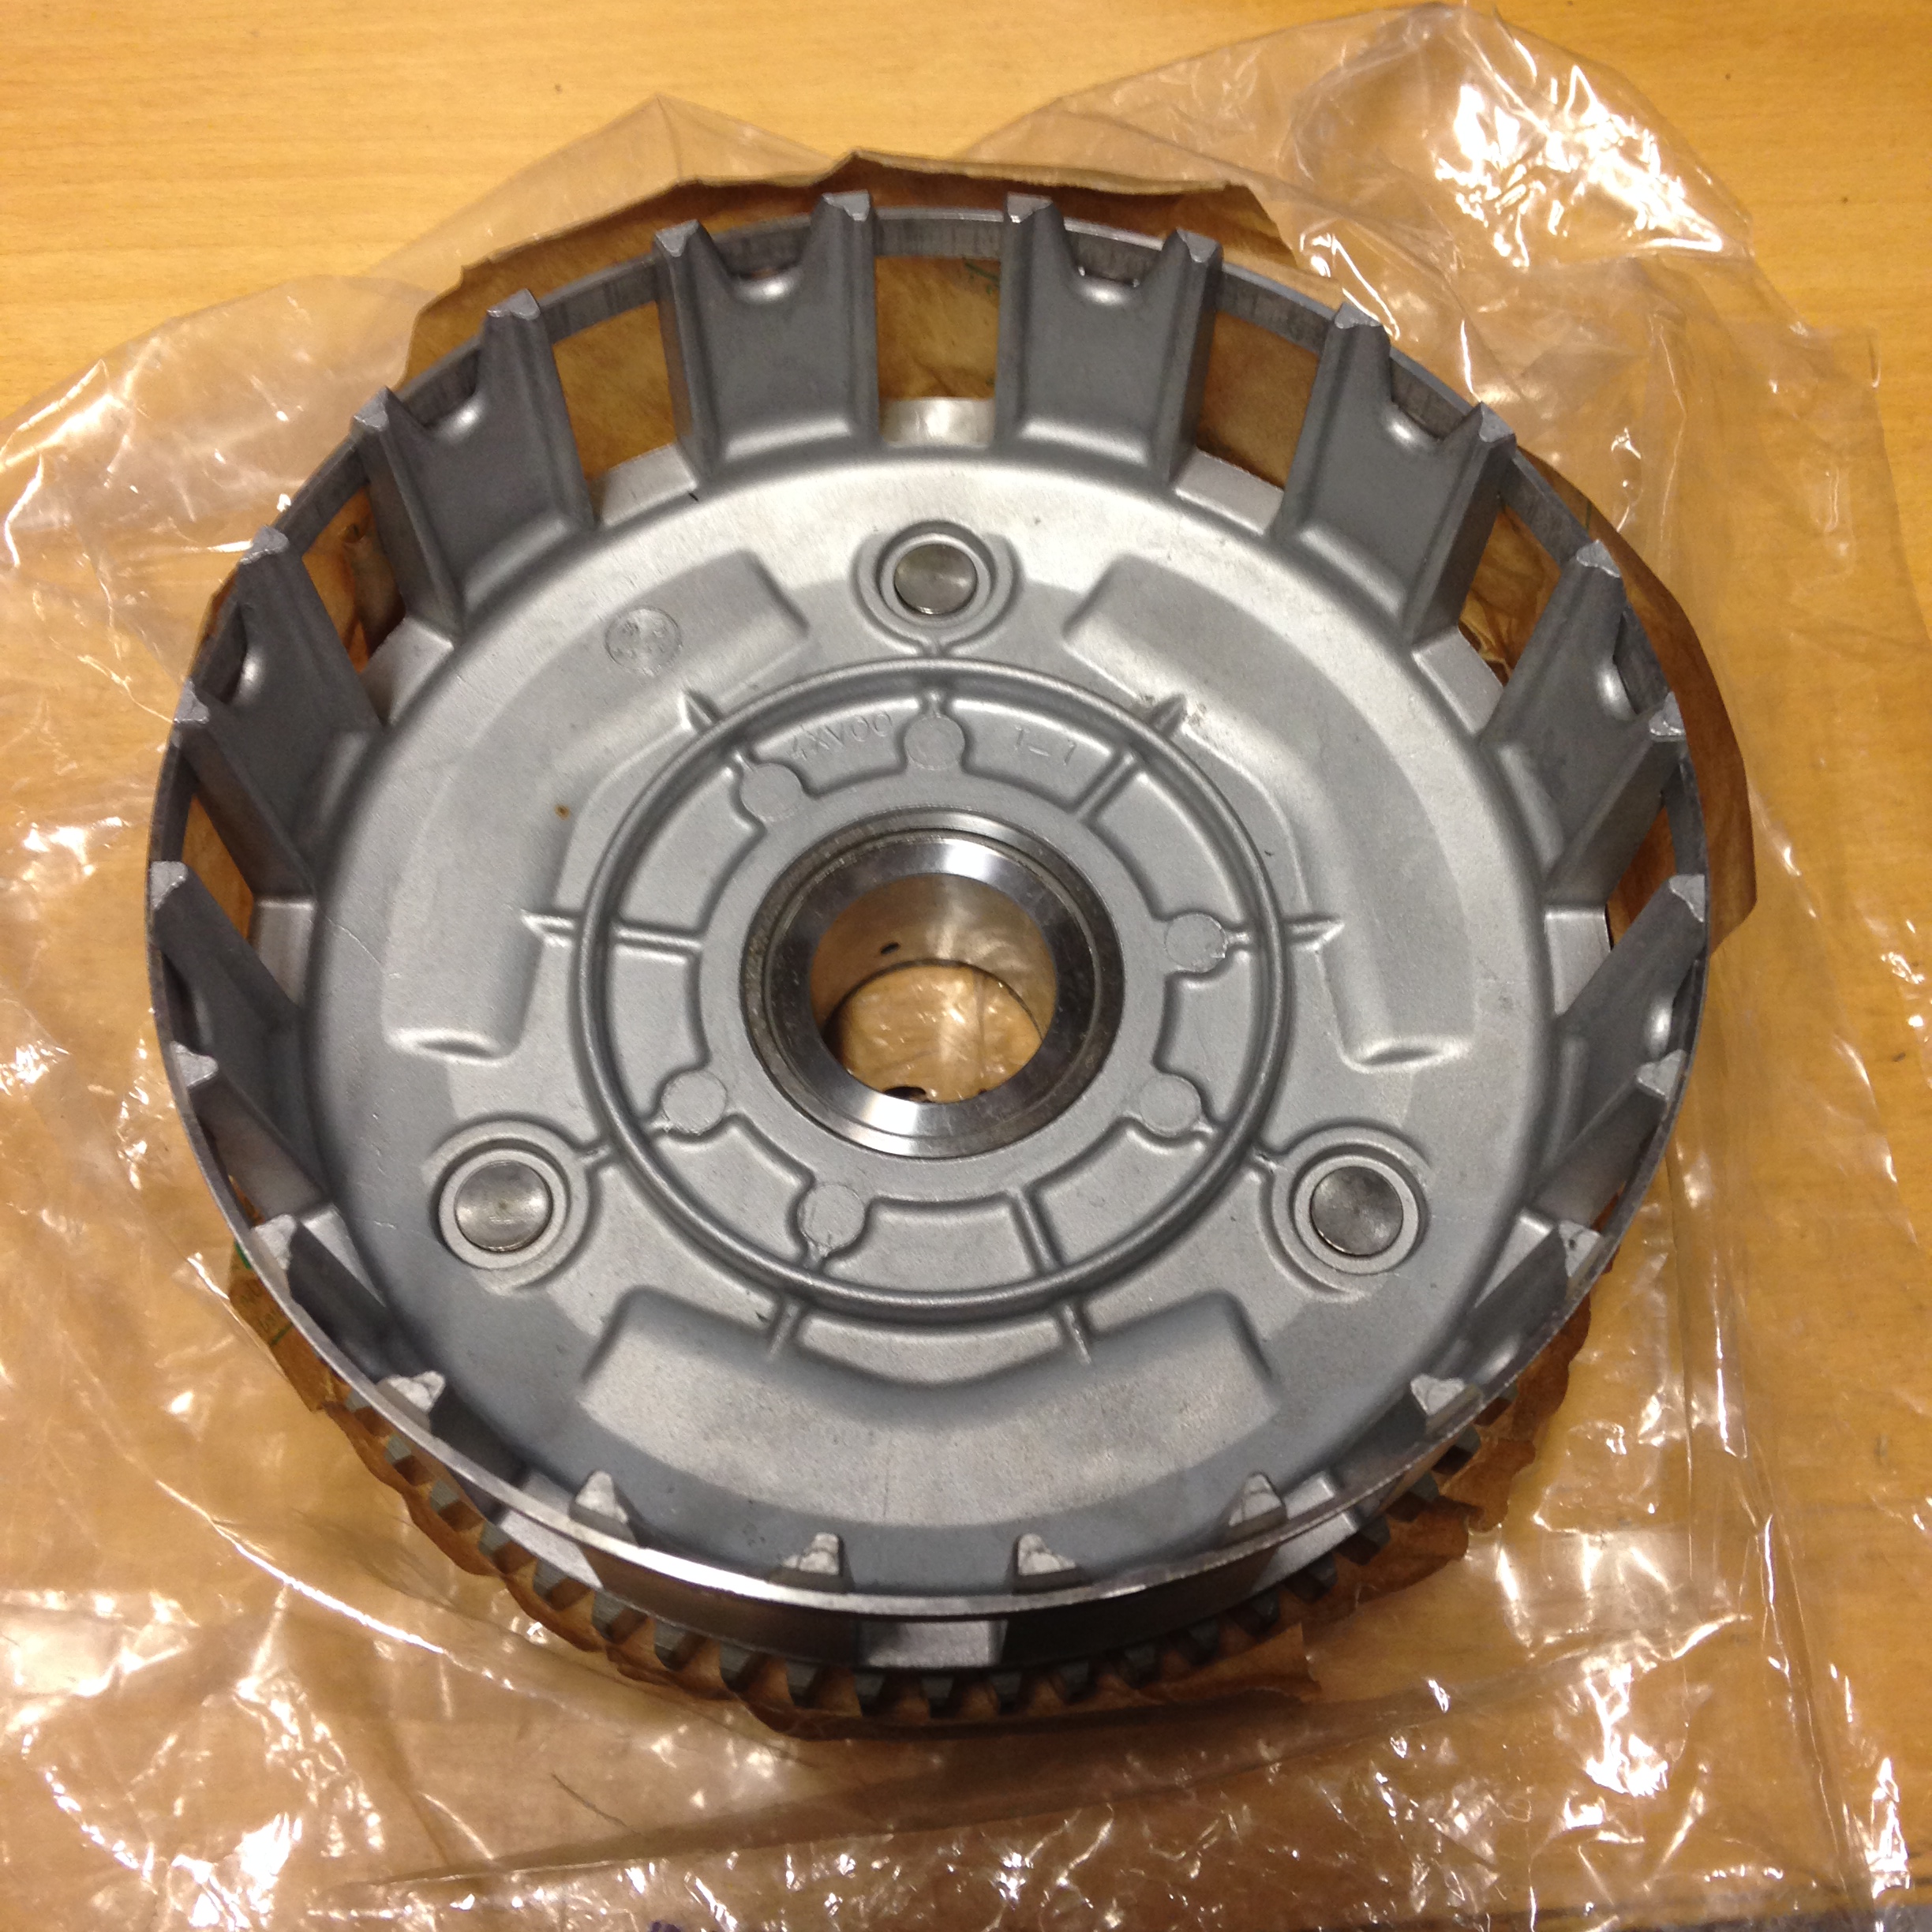 YAMAHA YZF R1 CLUTCH BASKET COMPLETE, PRIMARY DRIVEN GEAR, GENUINE NOS P/No 4XV1615000